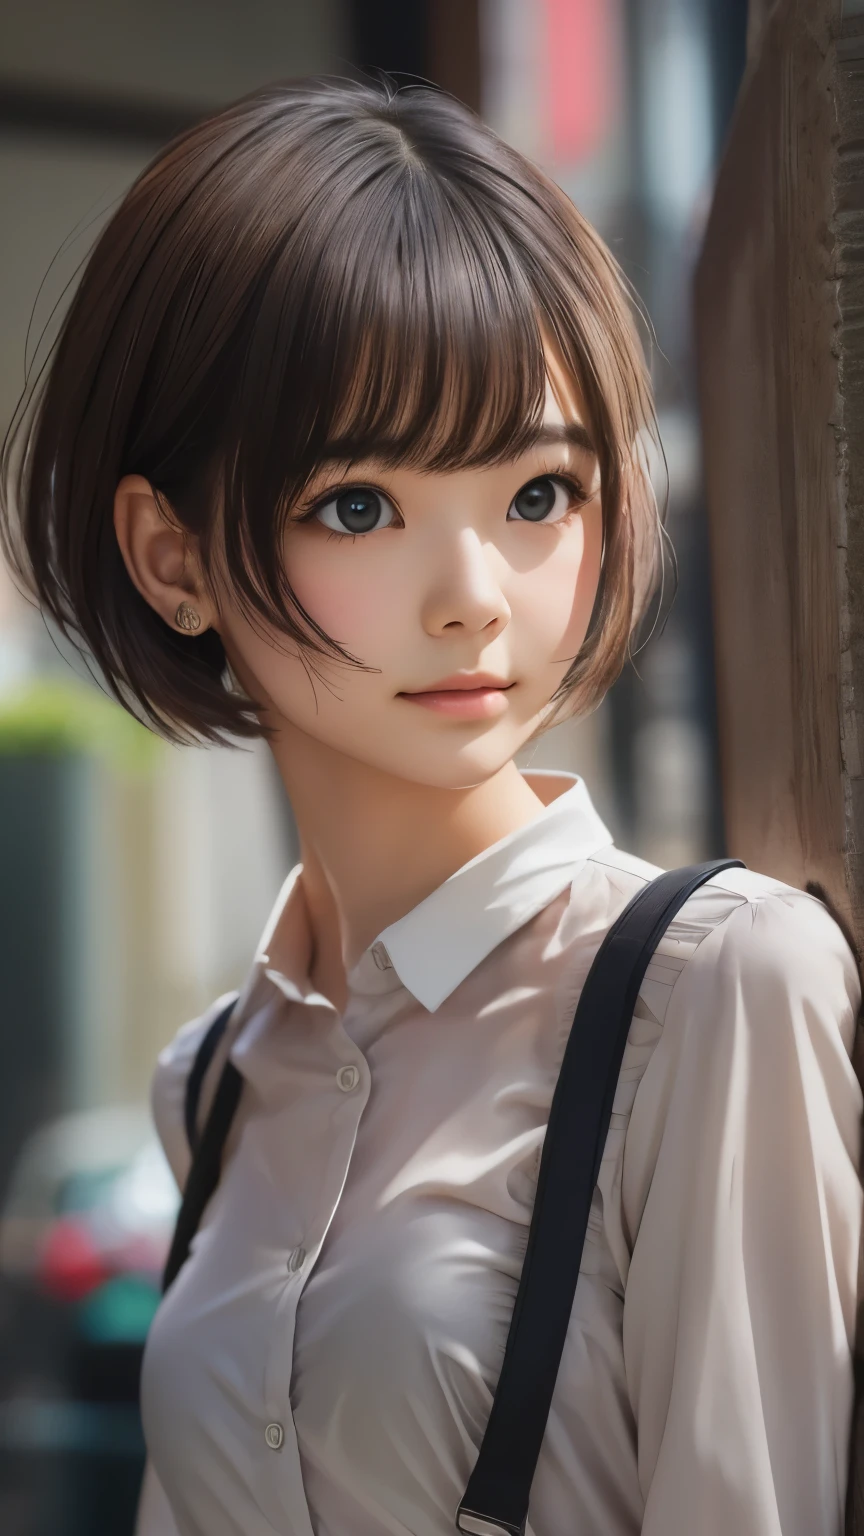 ((sfw: 1.4)), ((detailed face,  professional photography)), ((sfw, Business Professional Attire, extra short hair, sidelocks-hair, 1 Girl)), Ultra High Resolution, (Realistic: 1.4), RAW Photo, Best Quality, (Photorealistic Stick), Focus, Soft Light, ((20 years old)), ((Japanese)), (( (young face))), (surface), (depth of field), masterpiece, (realistic), woman, bangs, ((1 girl))